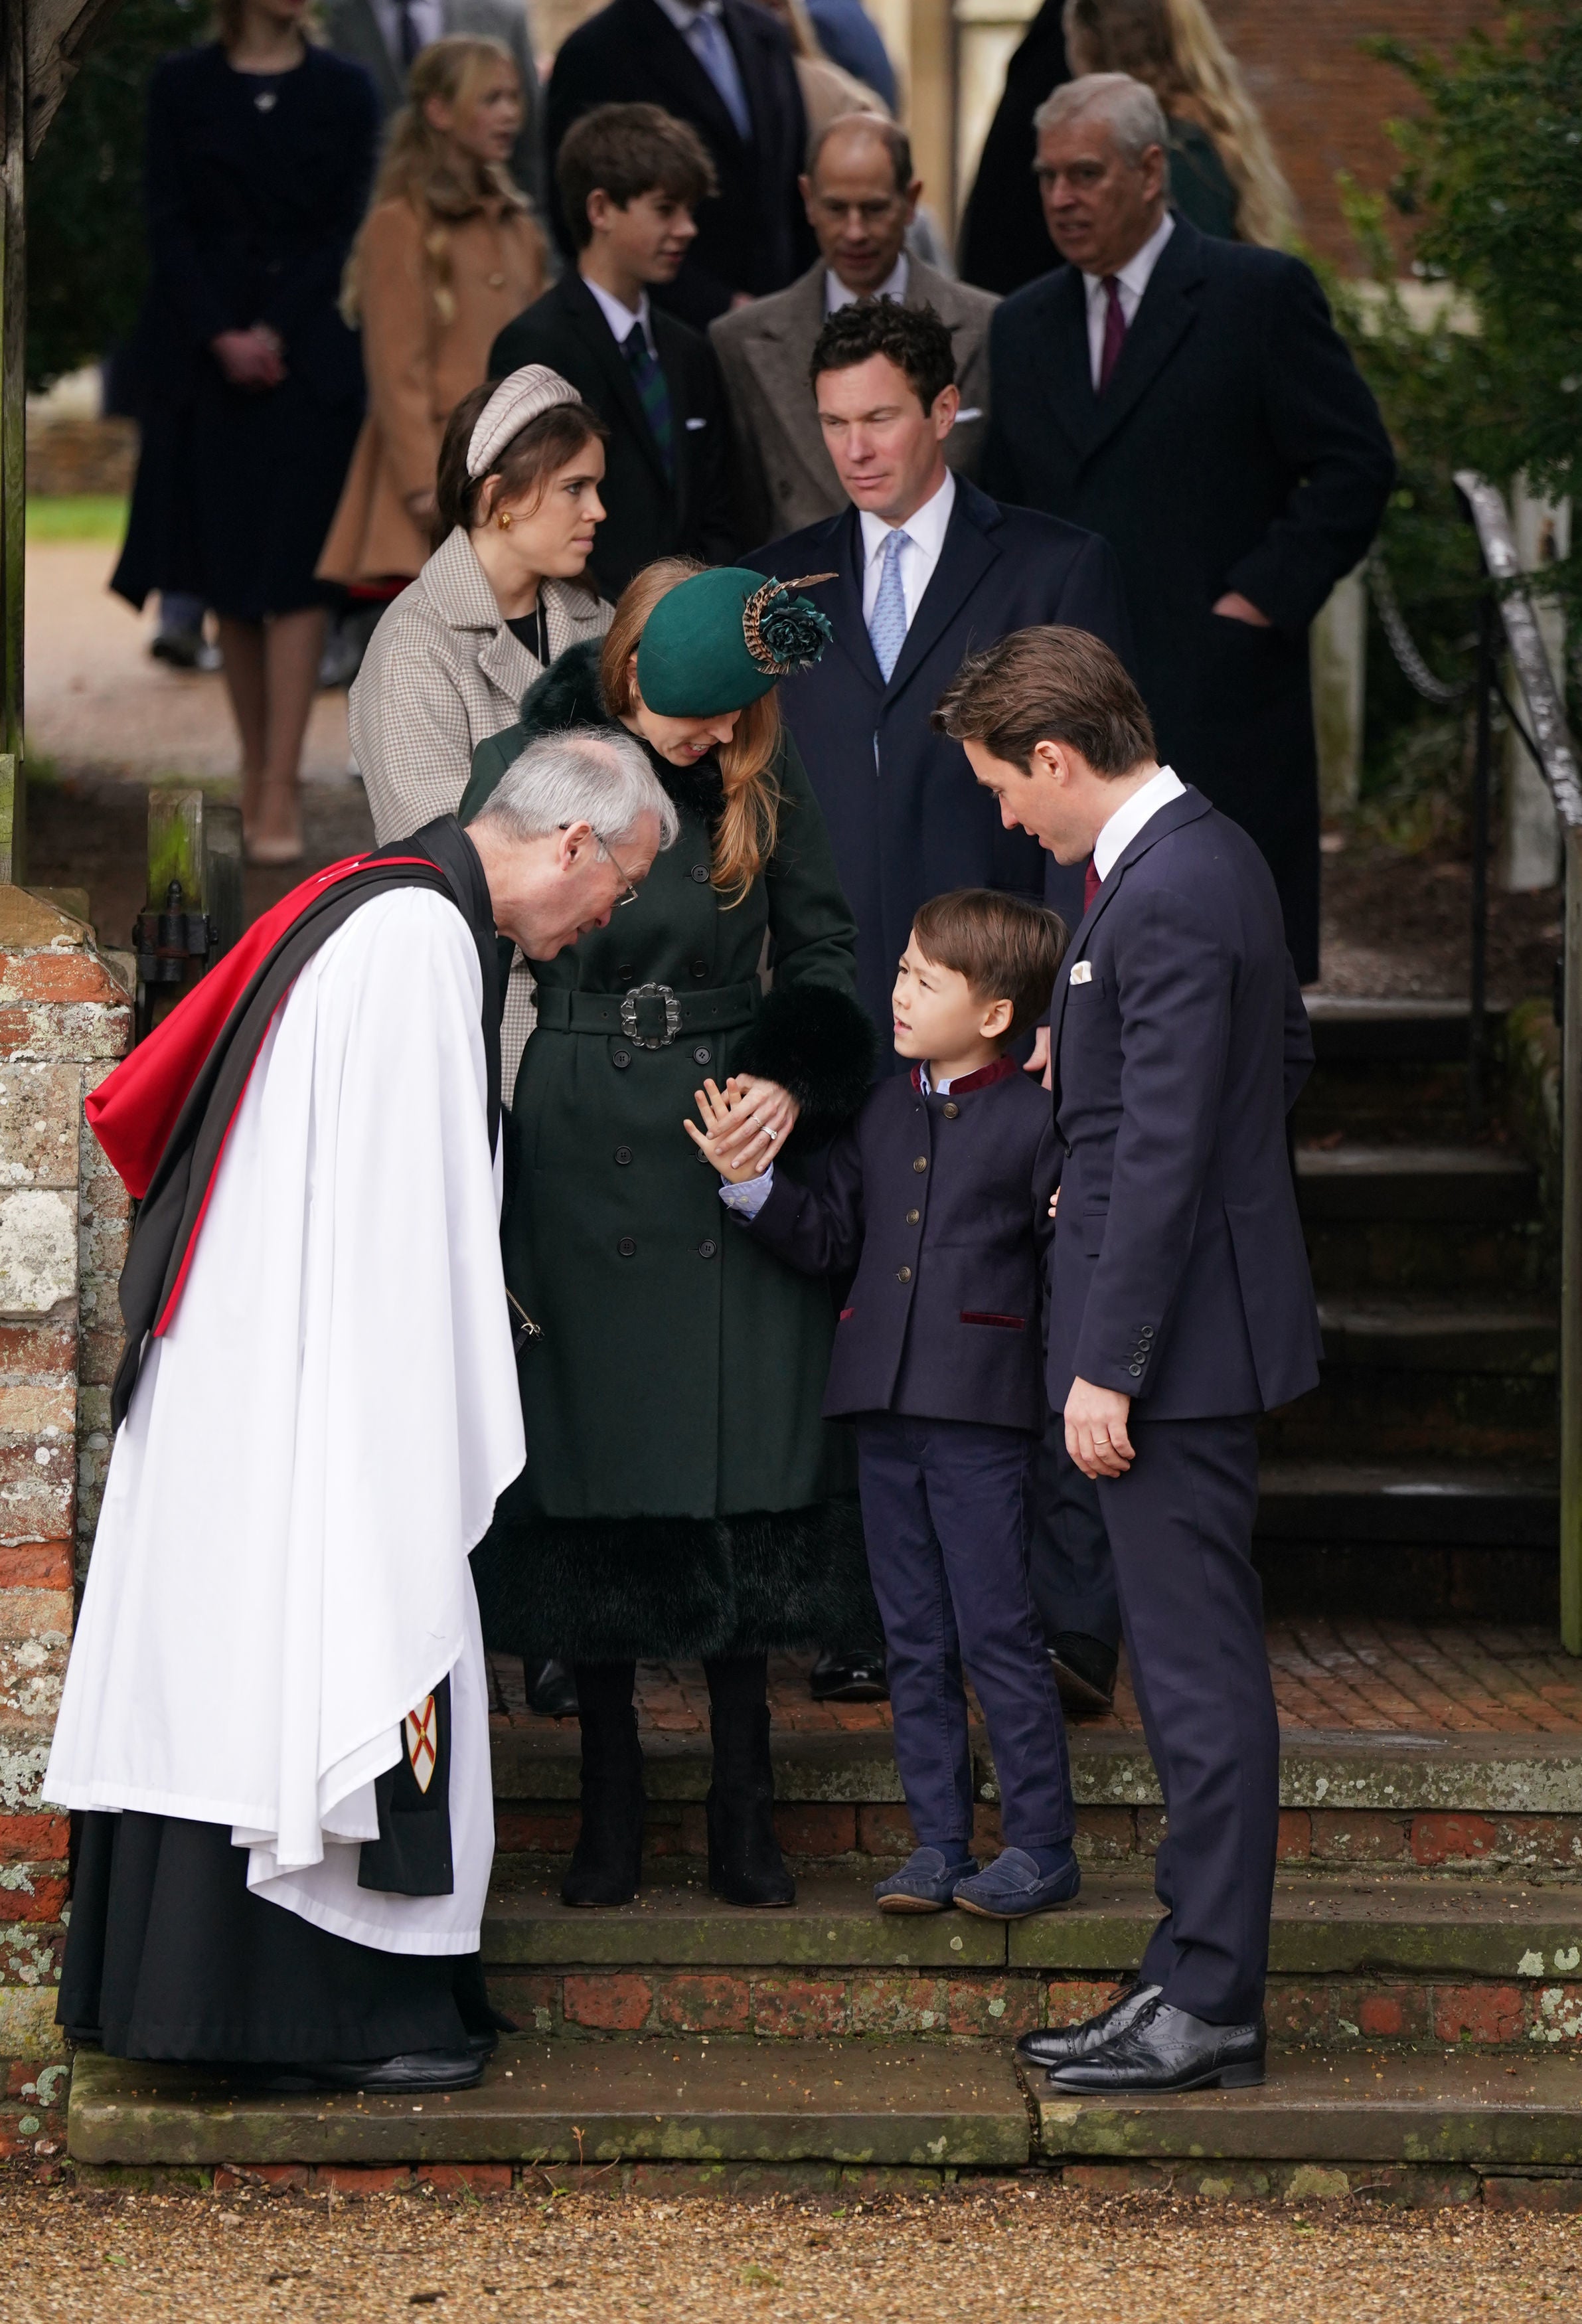 Princess Beatrice, Christopher Woolf, and Edoardo Mapelli Mozzi, (centre) Princess Eugenie and Jack Brooksbank, (back) James, Visount Severn, the Earl of Wessex and the Duke of York attending the Christmas Day morning church service at St Mary Magdalene Church